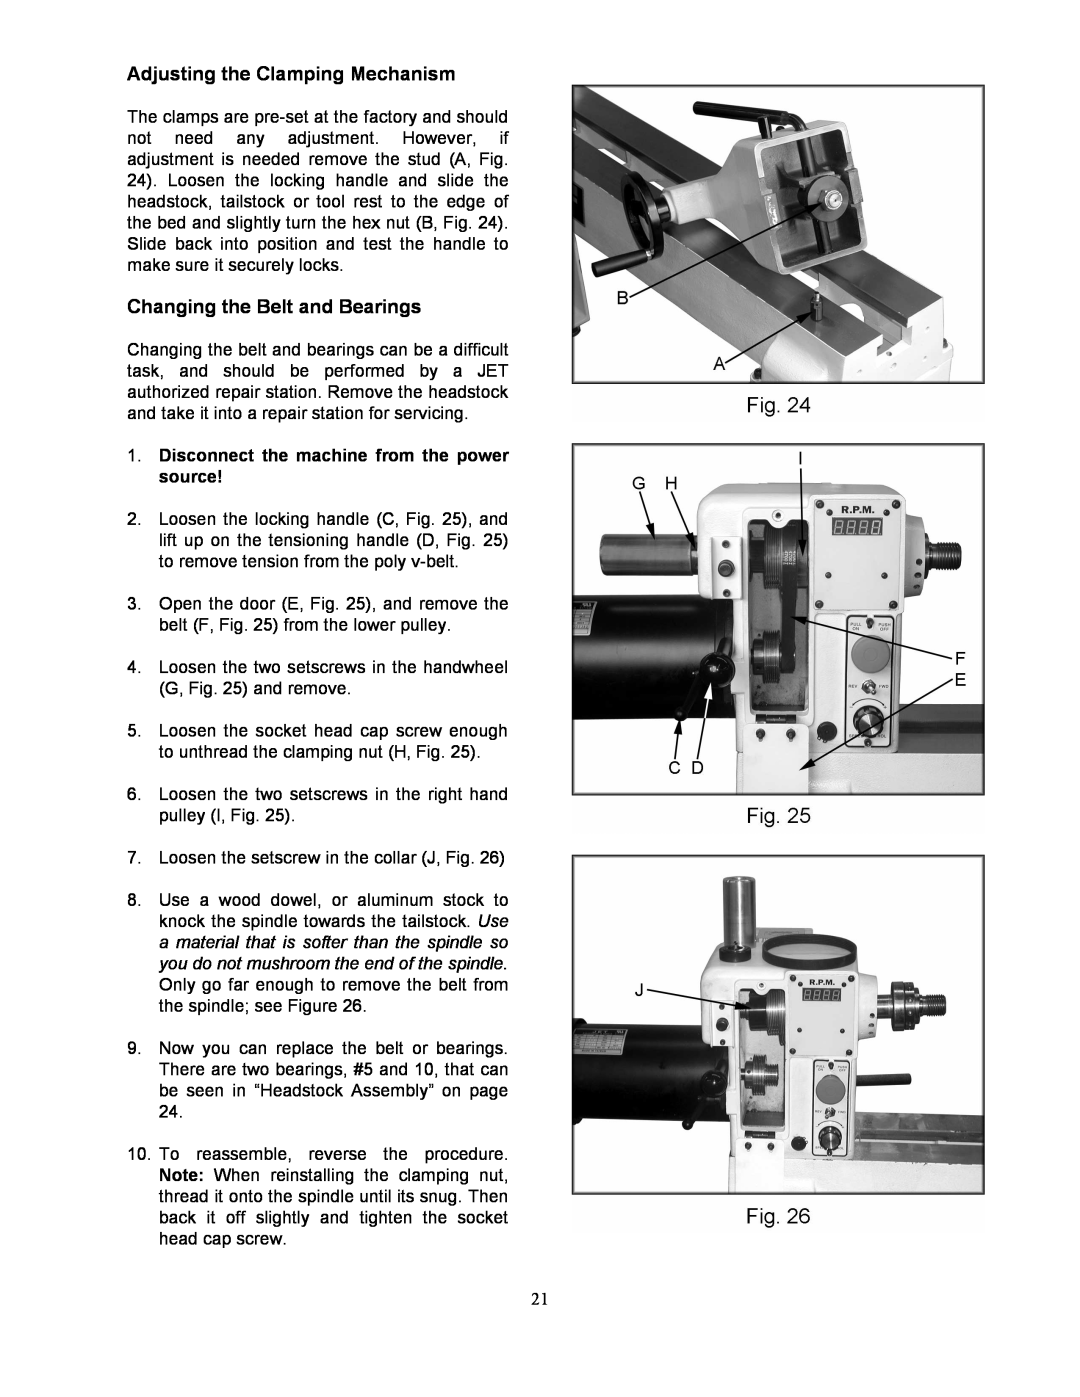 Jet Tools JWL-1642EVS-2 operating instructions Adjusting the Clamping Mechanism, Changing the Belt and Bearings 